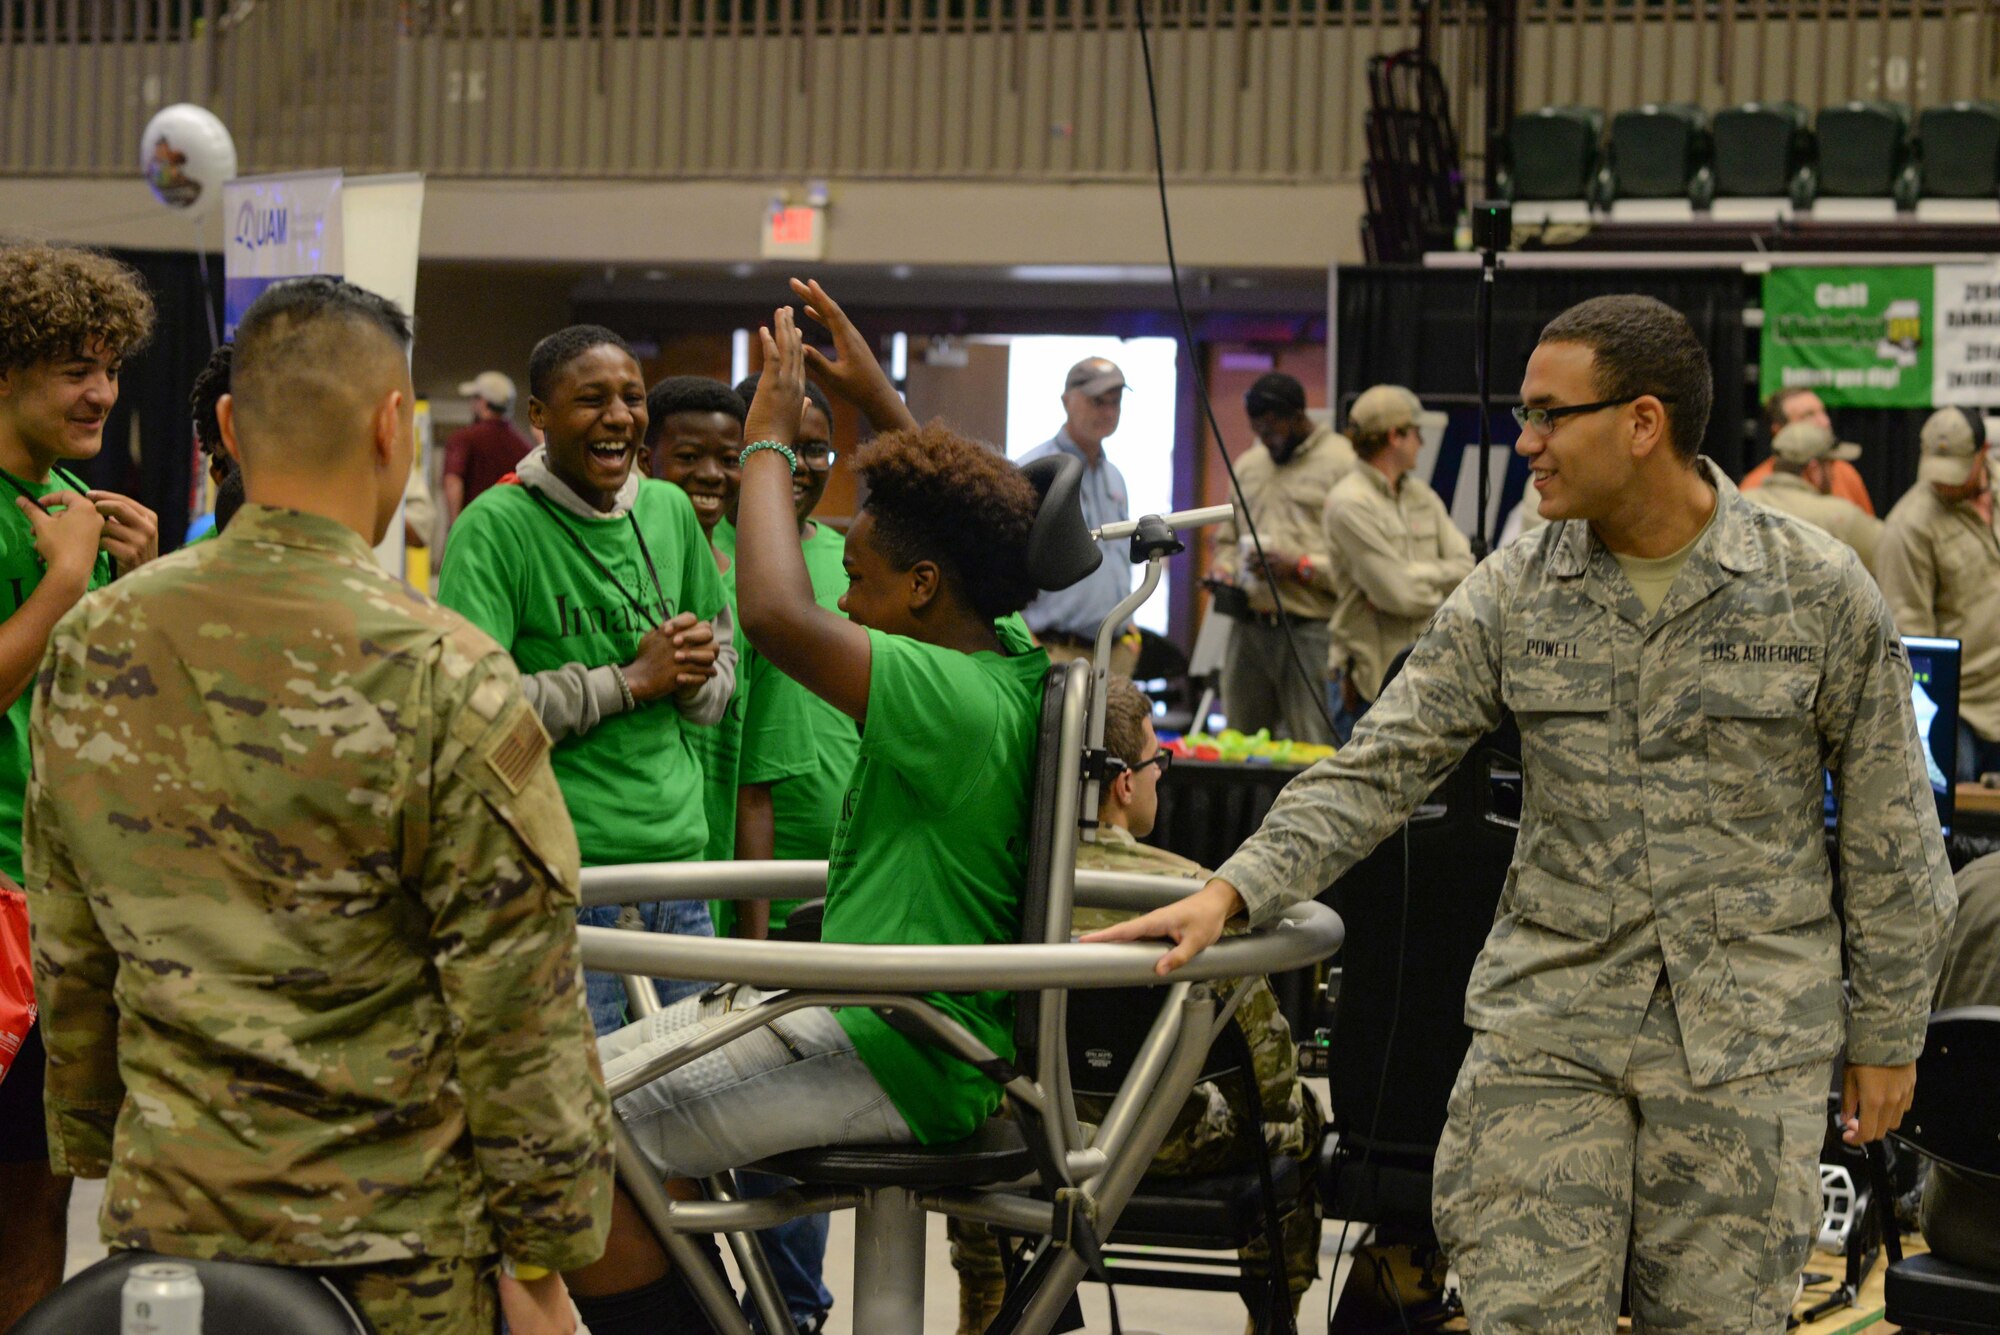 Senior Airman Queneth Salazar, 14th Operational Medical Readiness Squadron aerospace technician, and Airman 1st Class Troy Powell, 14th OMRS aerospace technicians from Columbus Air Force Base, Miss., spin a student in a Barany chair during the Imagine the Possibilities Career Expo Oct. 1, 2019, at the BancorpSouth Arena in Tupelo. A Barany chair is used to simulate spacial disorientation, and show aircrew the effects they may experience while flying. (U.S. Air Force photo by Airman Davis Donaldson)